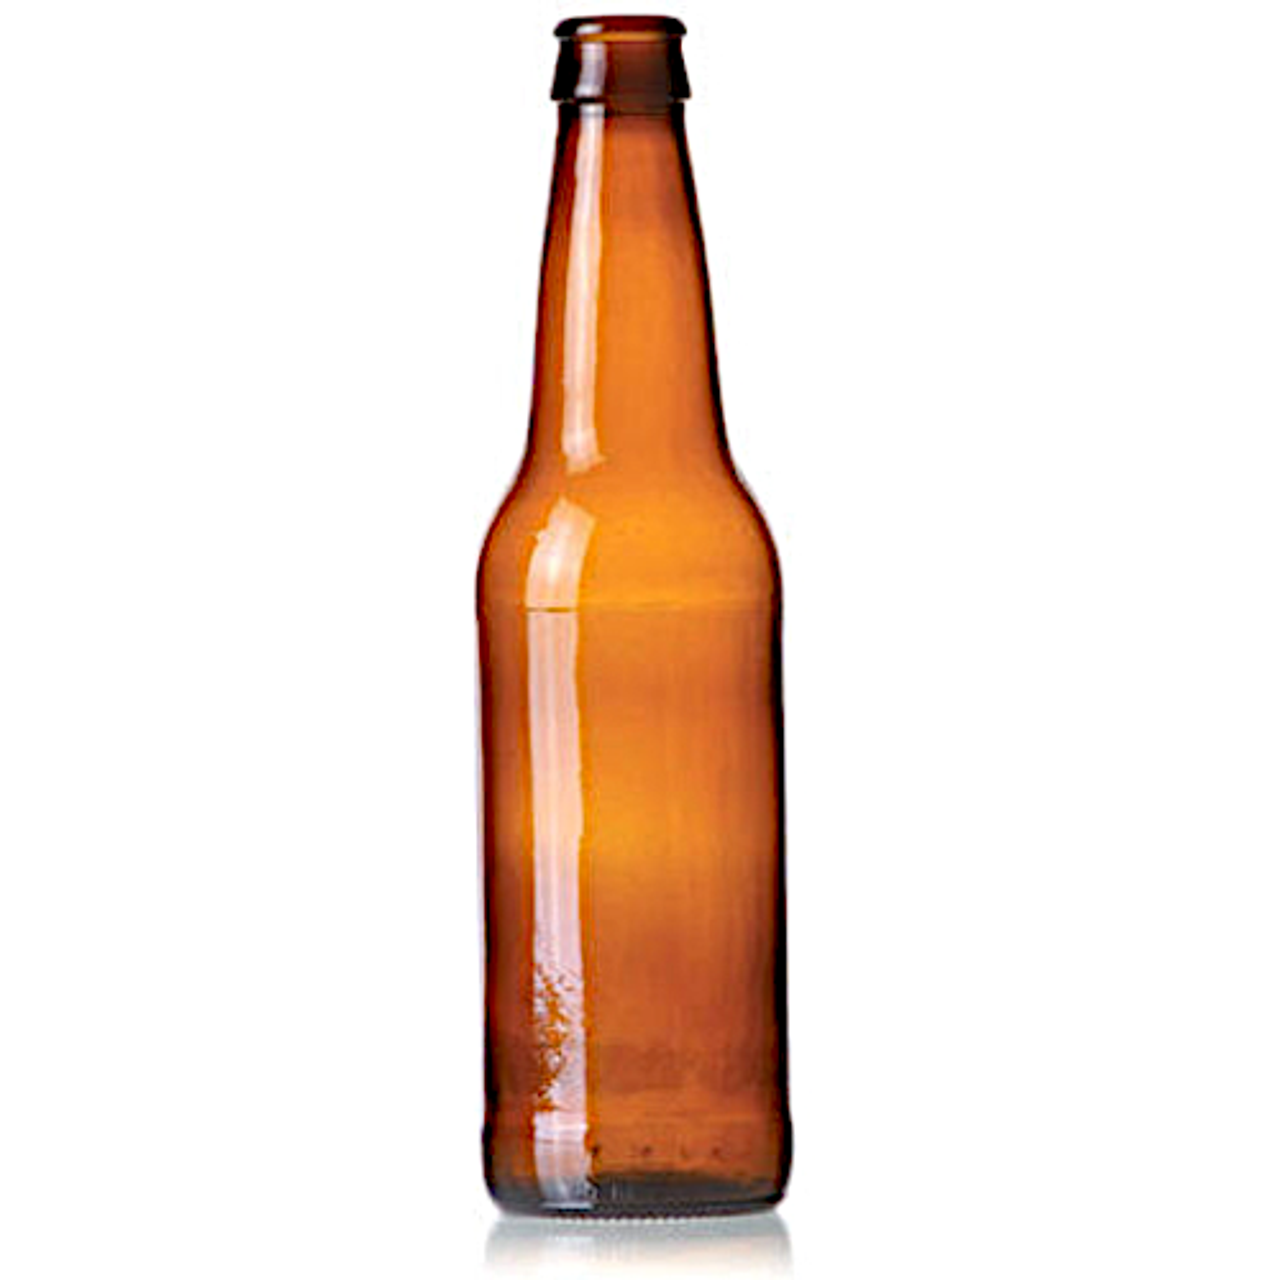 classic-12-oz-glass-bottles-12-pack.html – Demon Brewing Co.